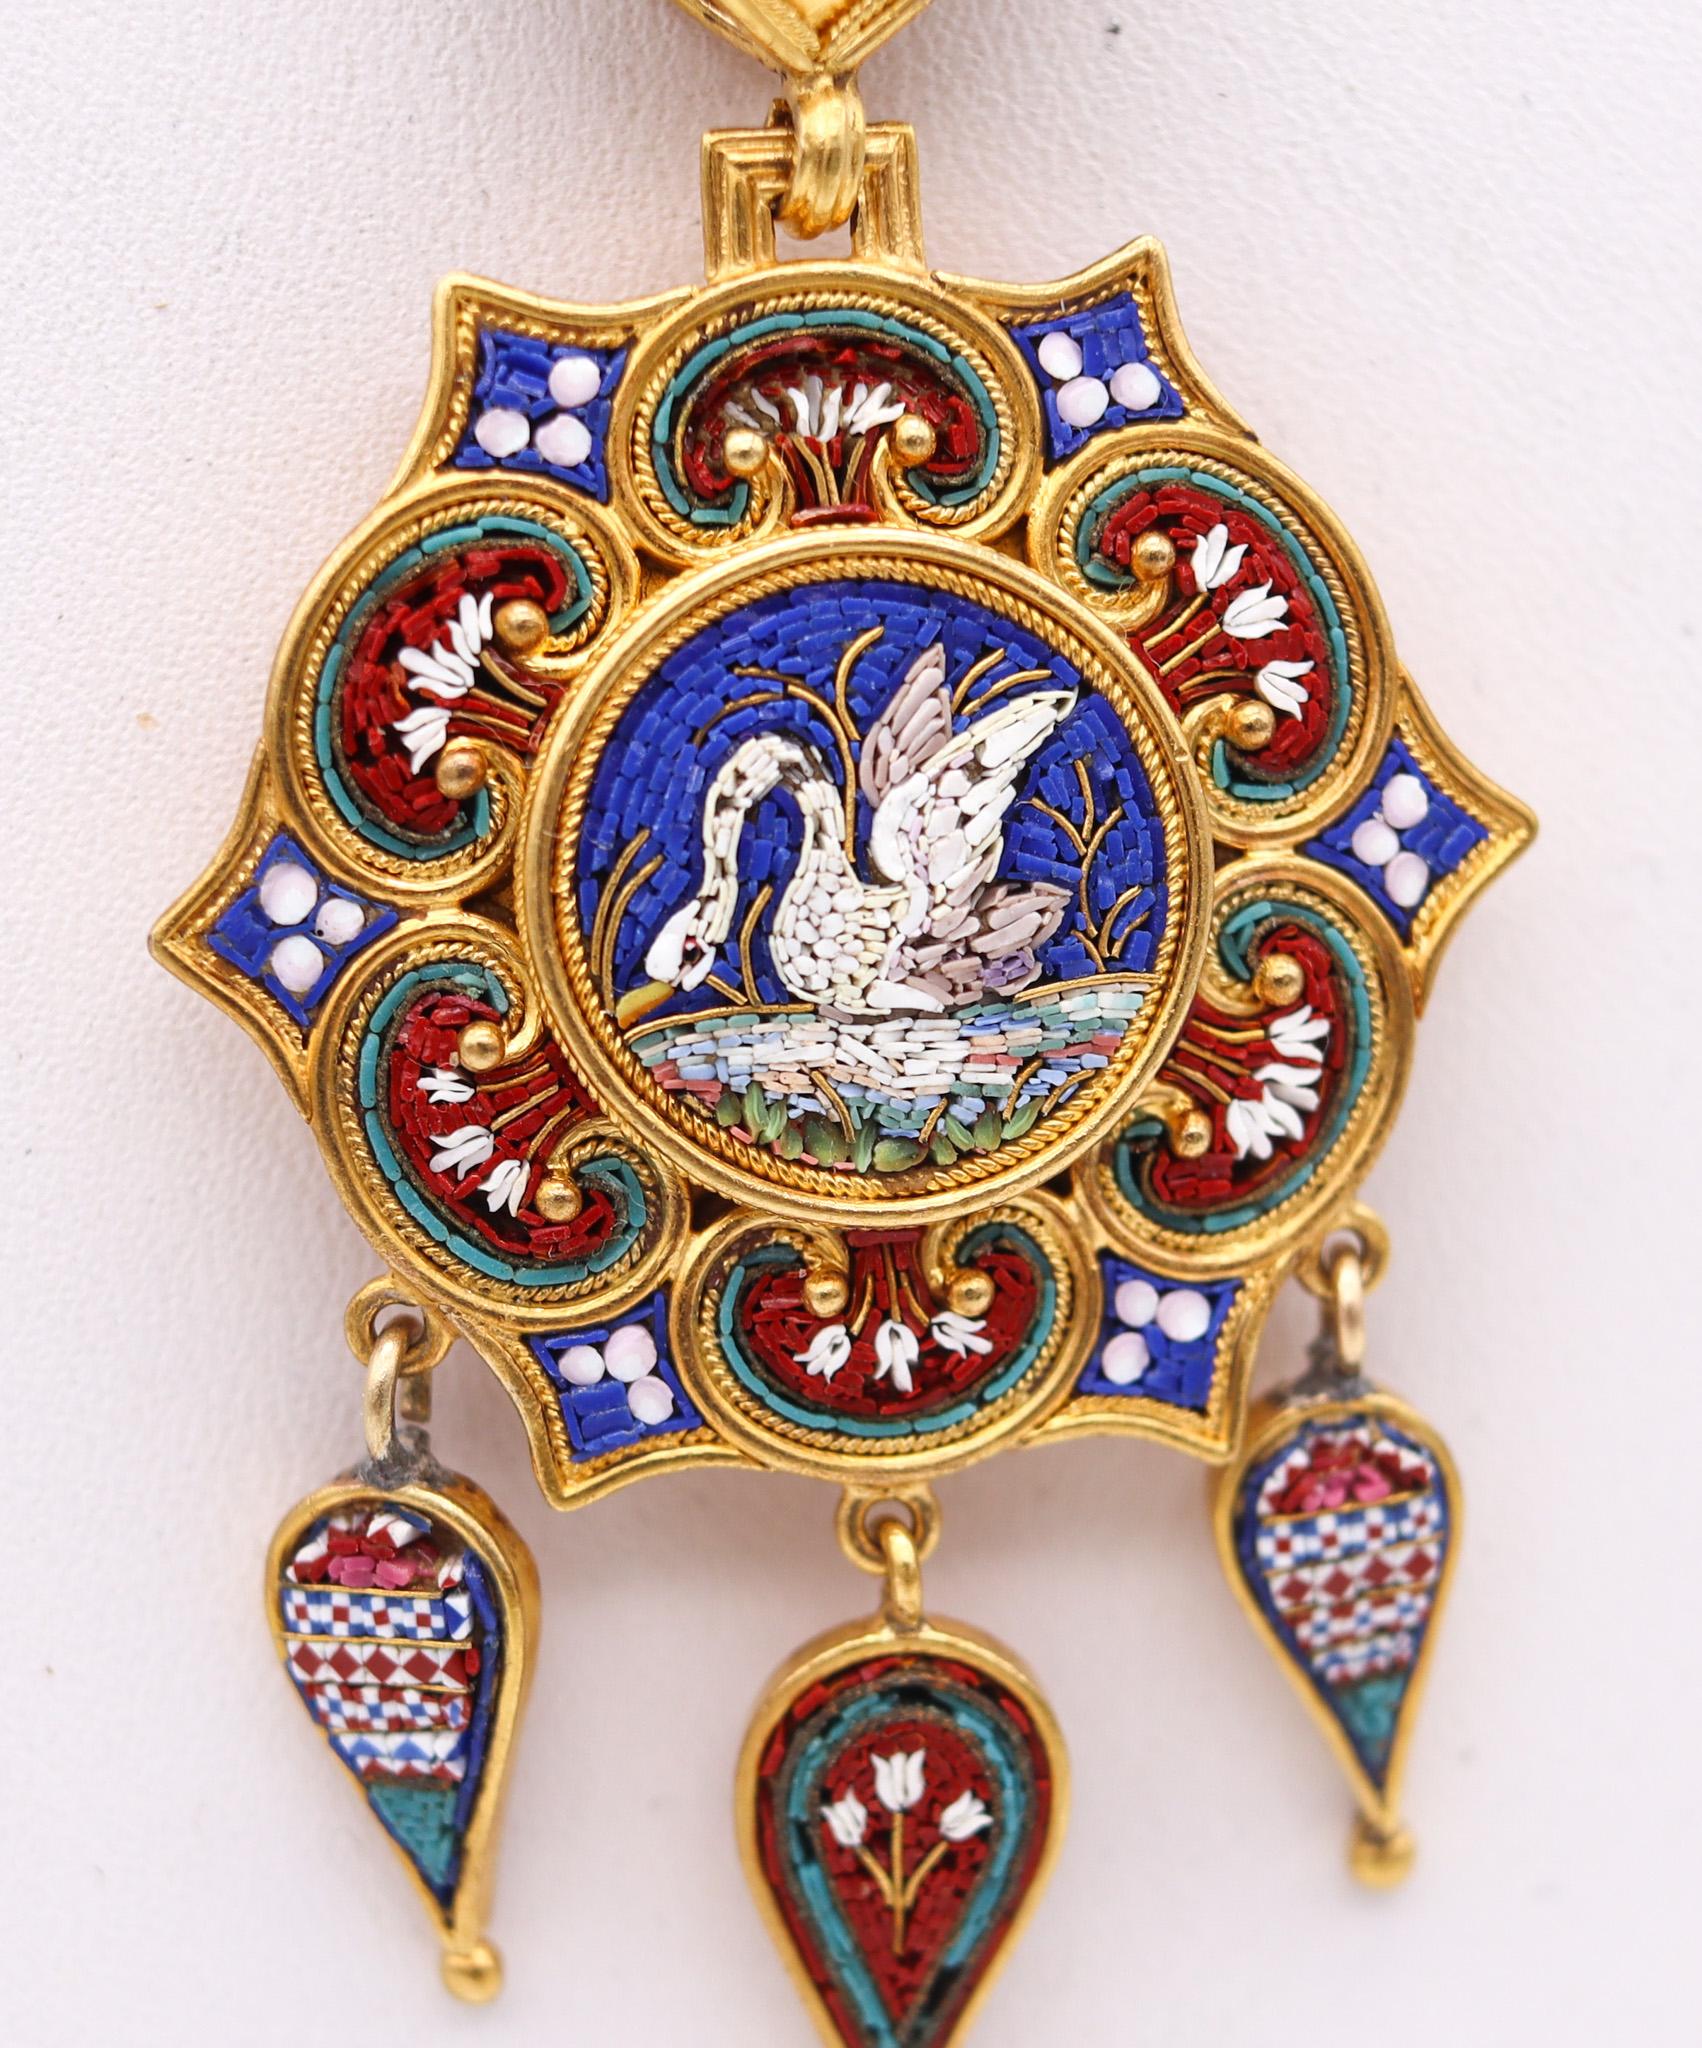 Roman revival grand tour pendant with Swan.

Beautiful historical piece created during the Victorian Grand Tour era, at the Papal States in Rome Italy back in the 1850. This unusual pendant was carefully crafted with Roman and Etruscan revival